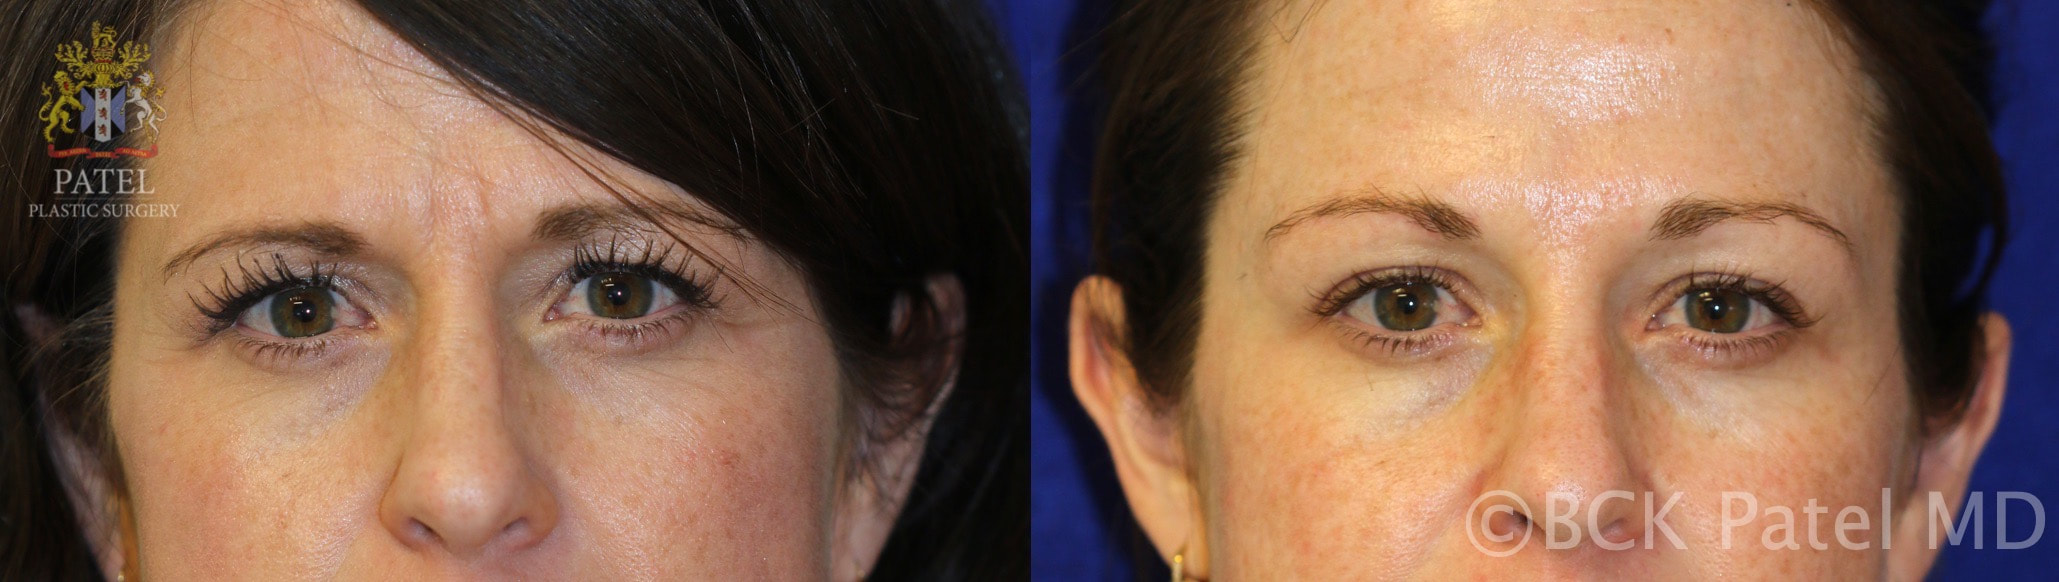 Botox injections to frown muscles, forehead lines and brows by Dr. BCK Patel MD, FRCS of Salt Lake City and St. George